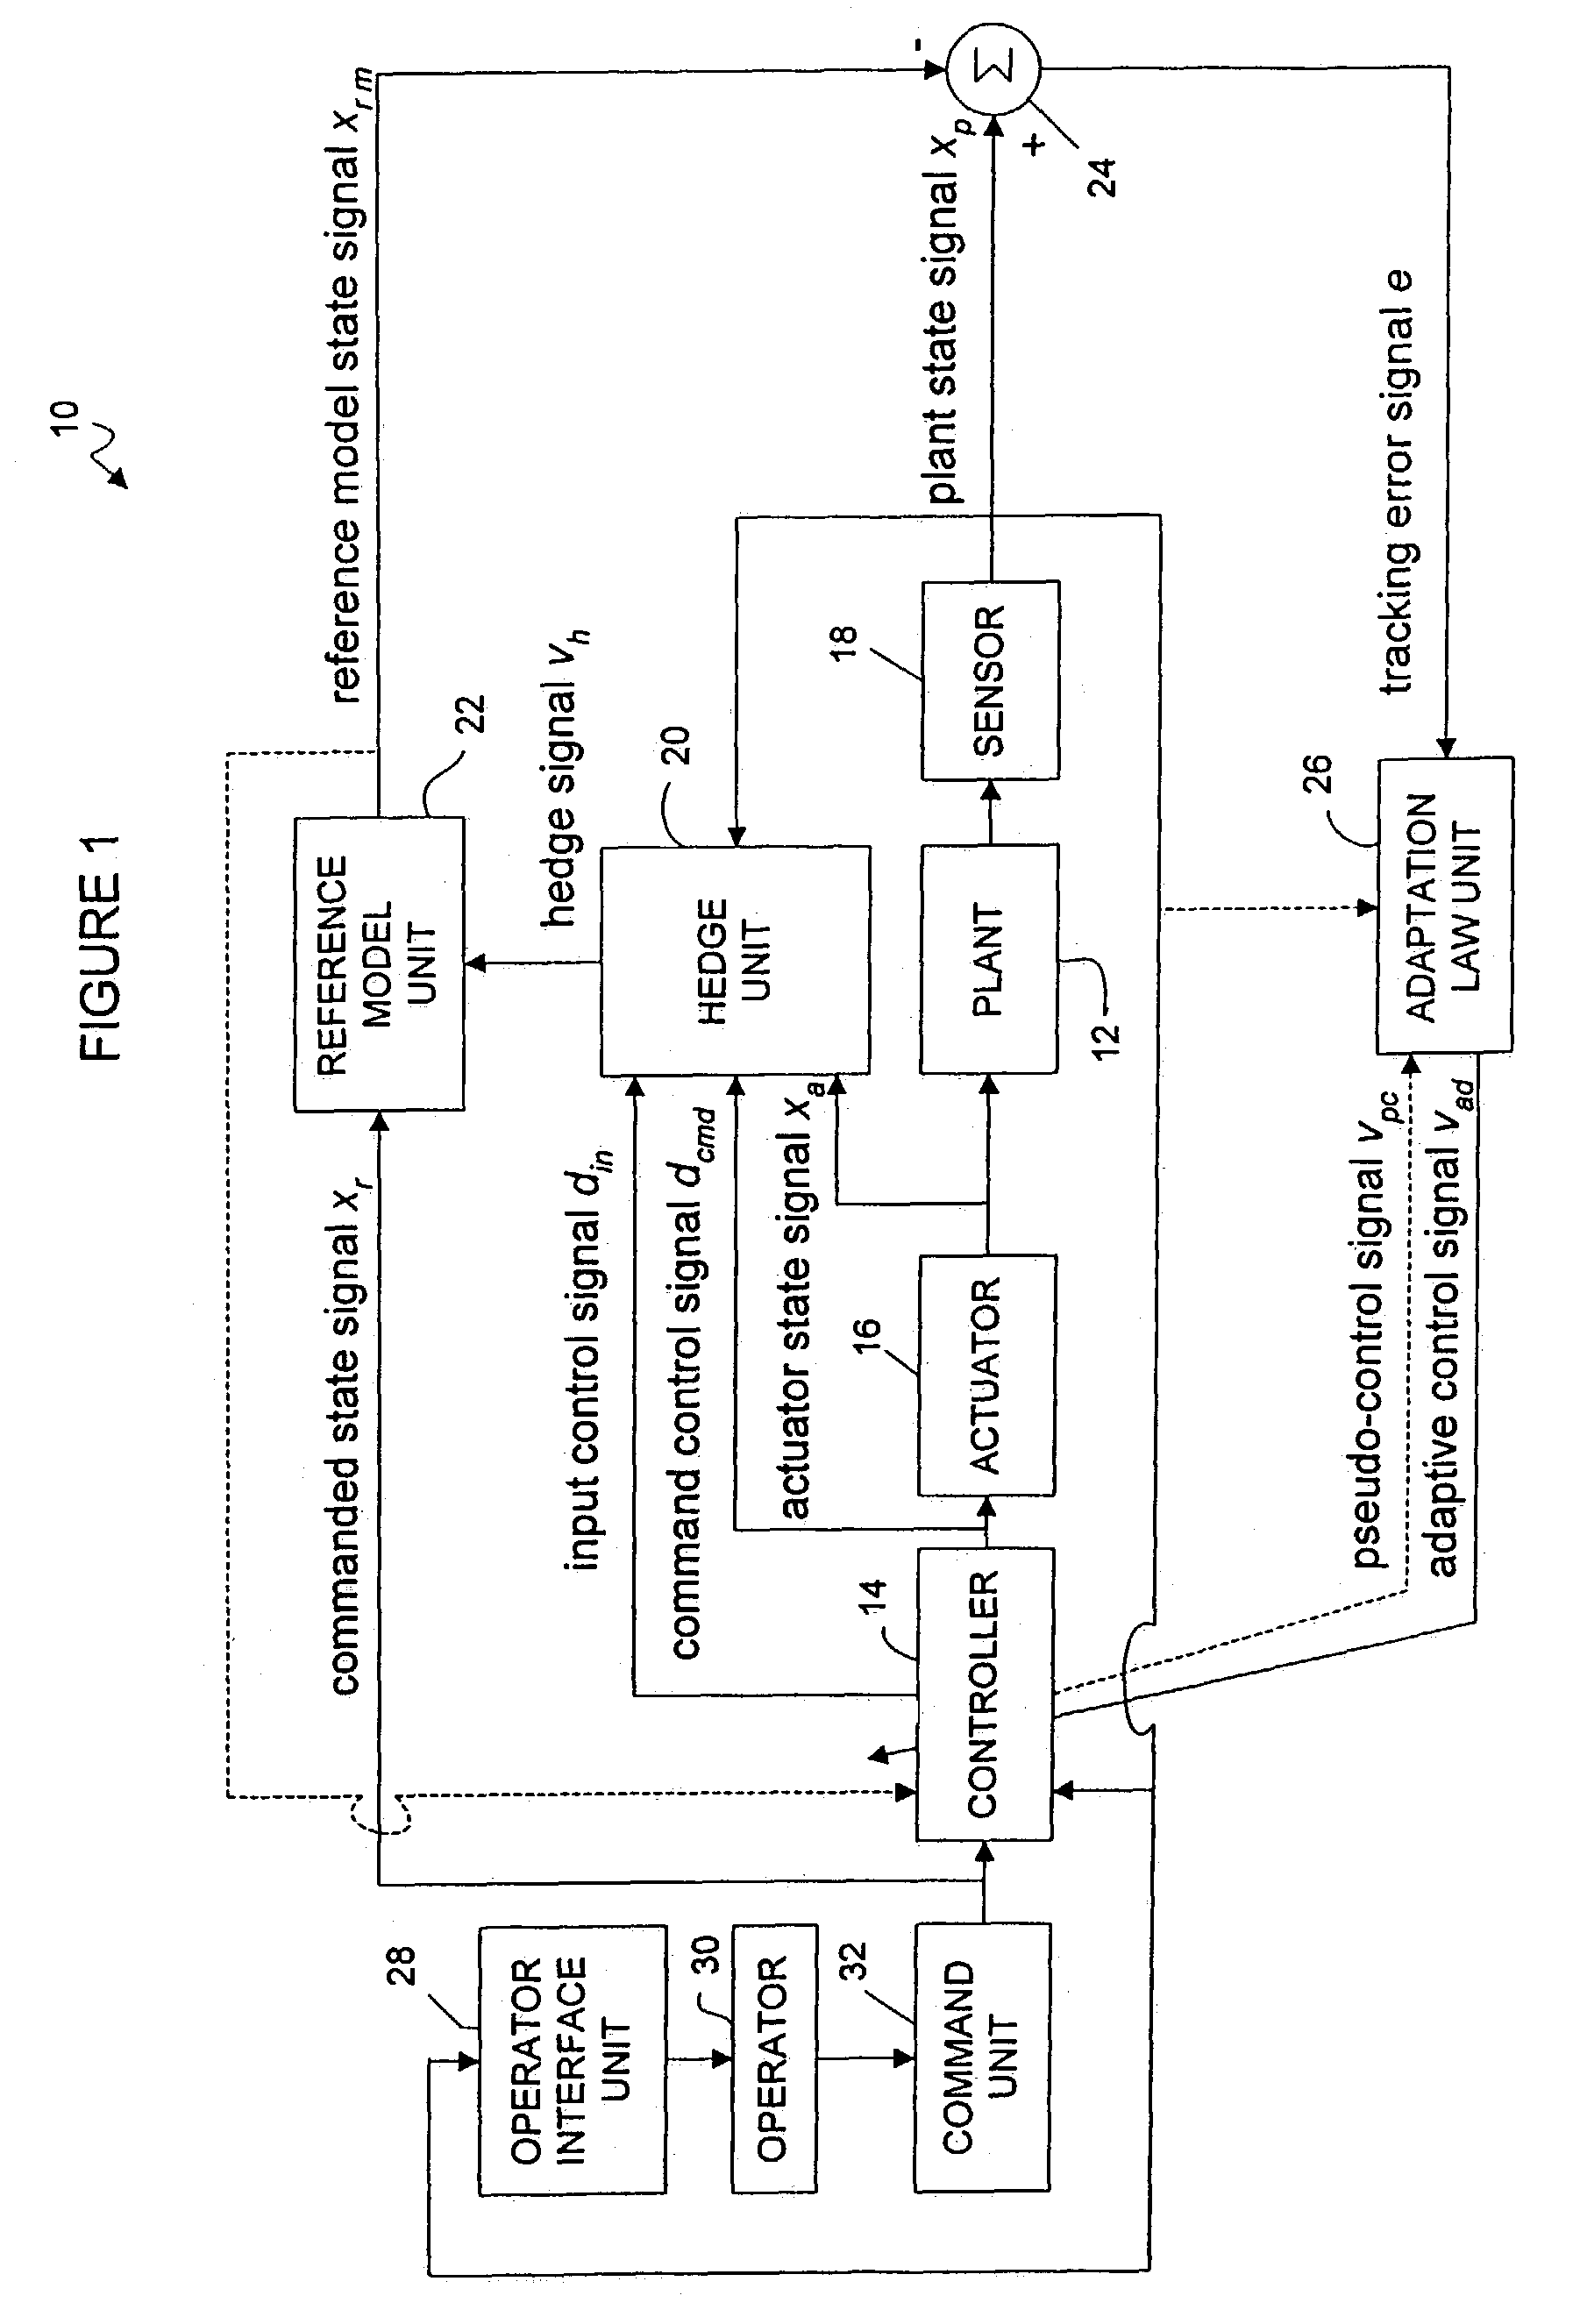 Adaptive control system having hedge unit and related apparatus and methods